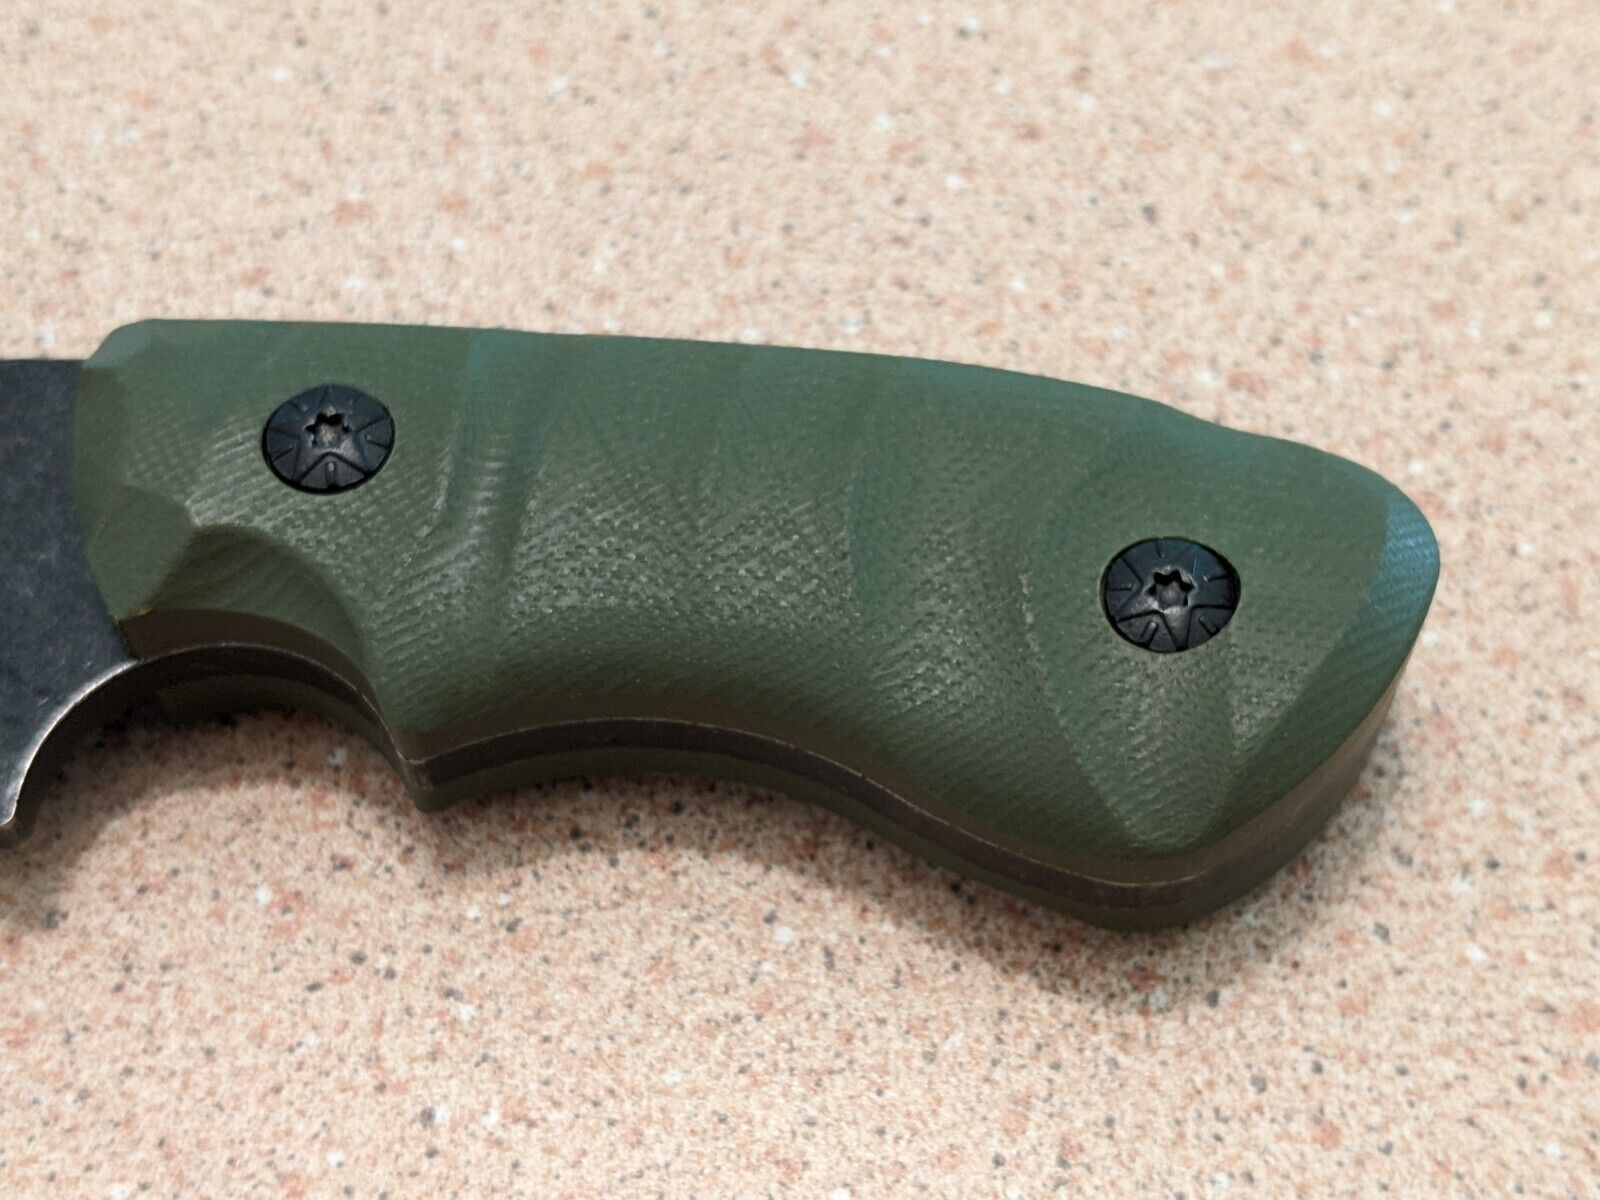 Boker Magnum Lil Giant Fixed Blade with Green G-10 Handle, 02LG113